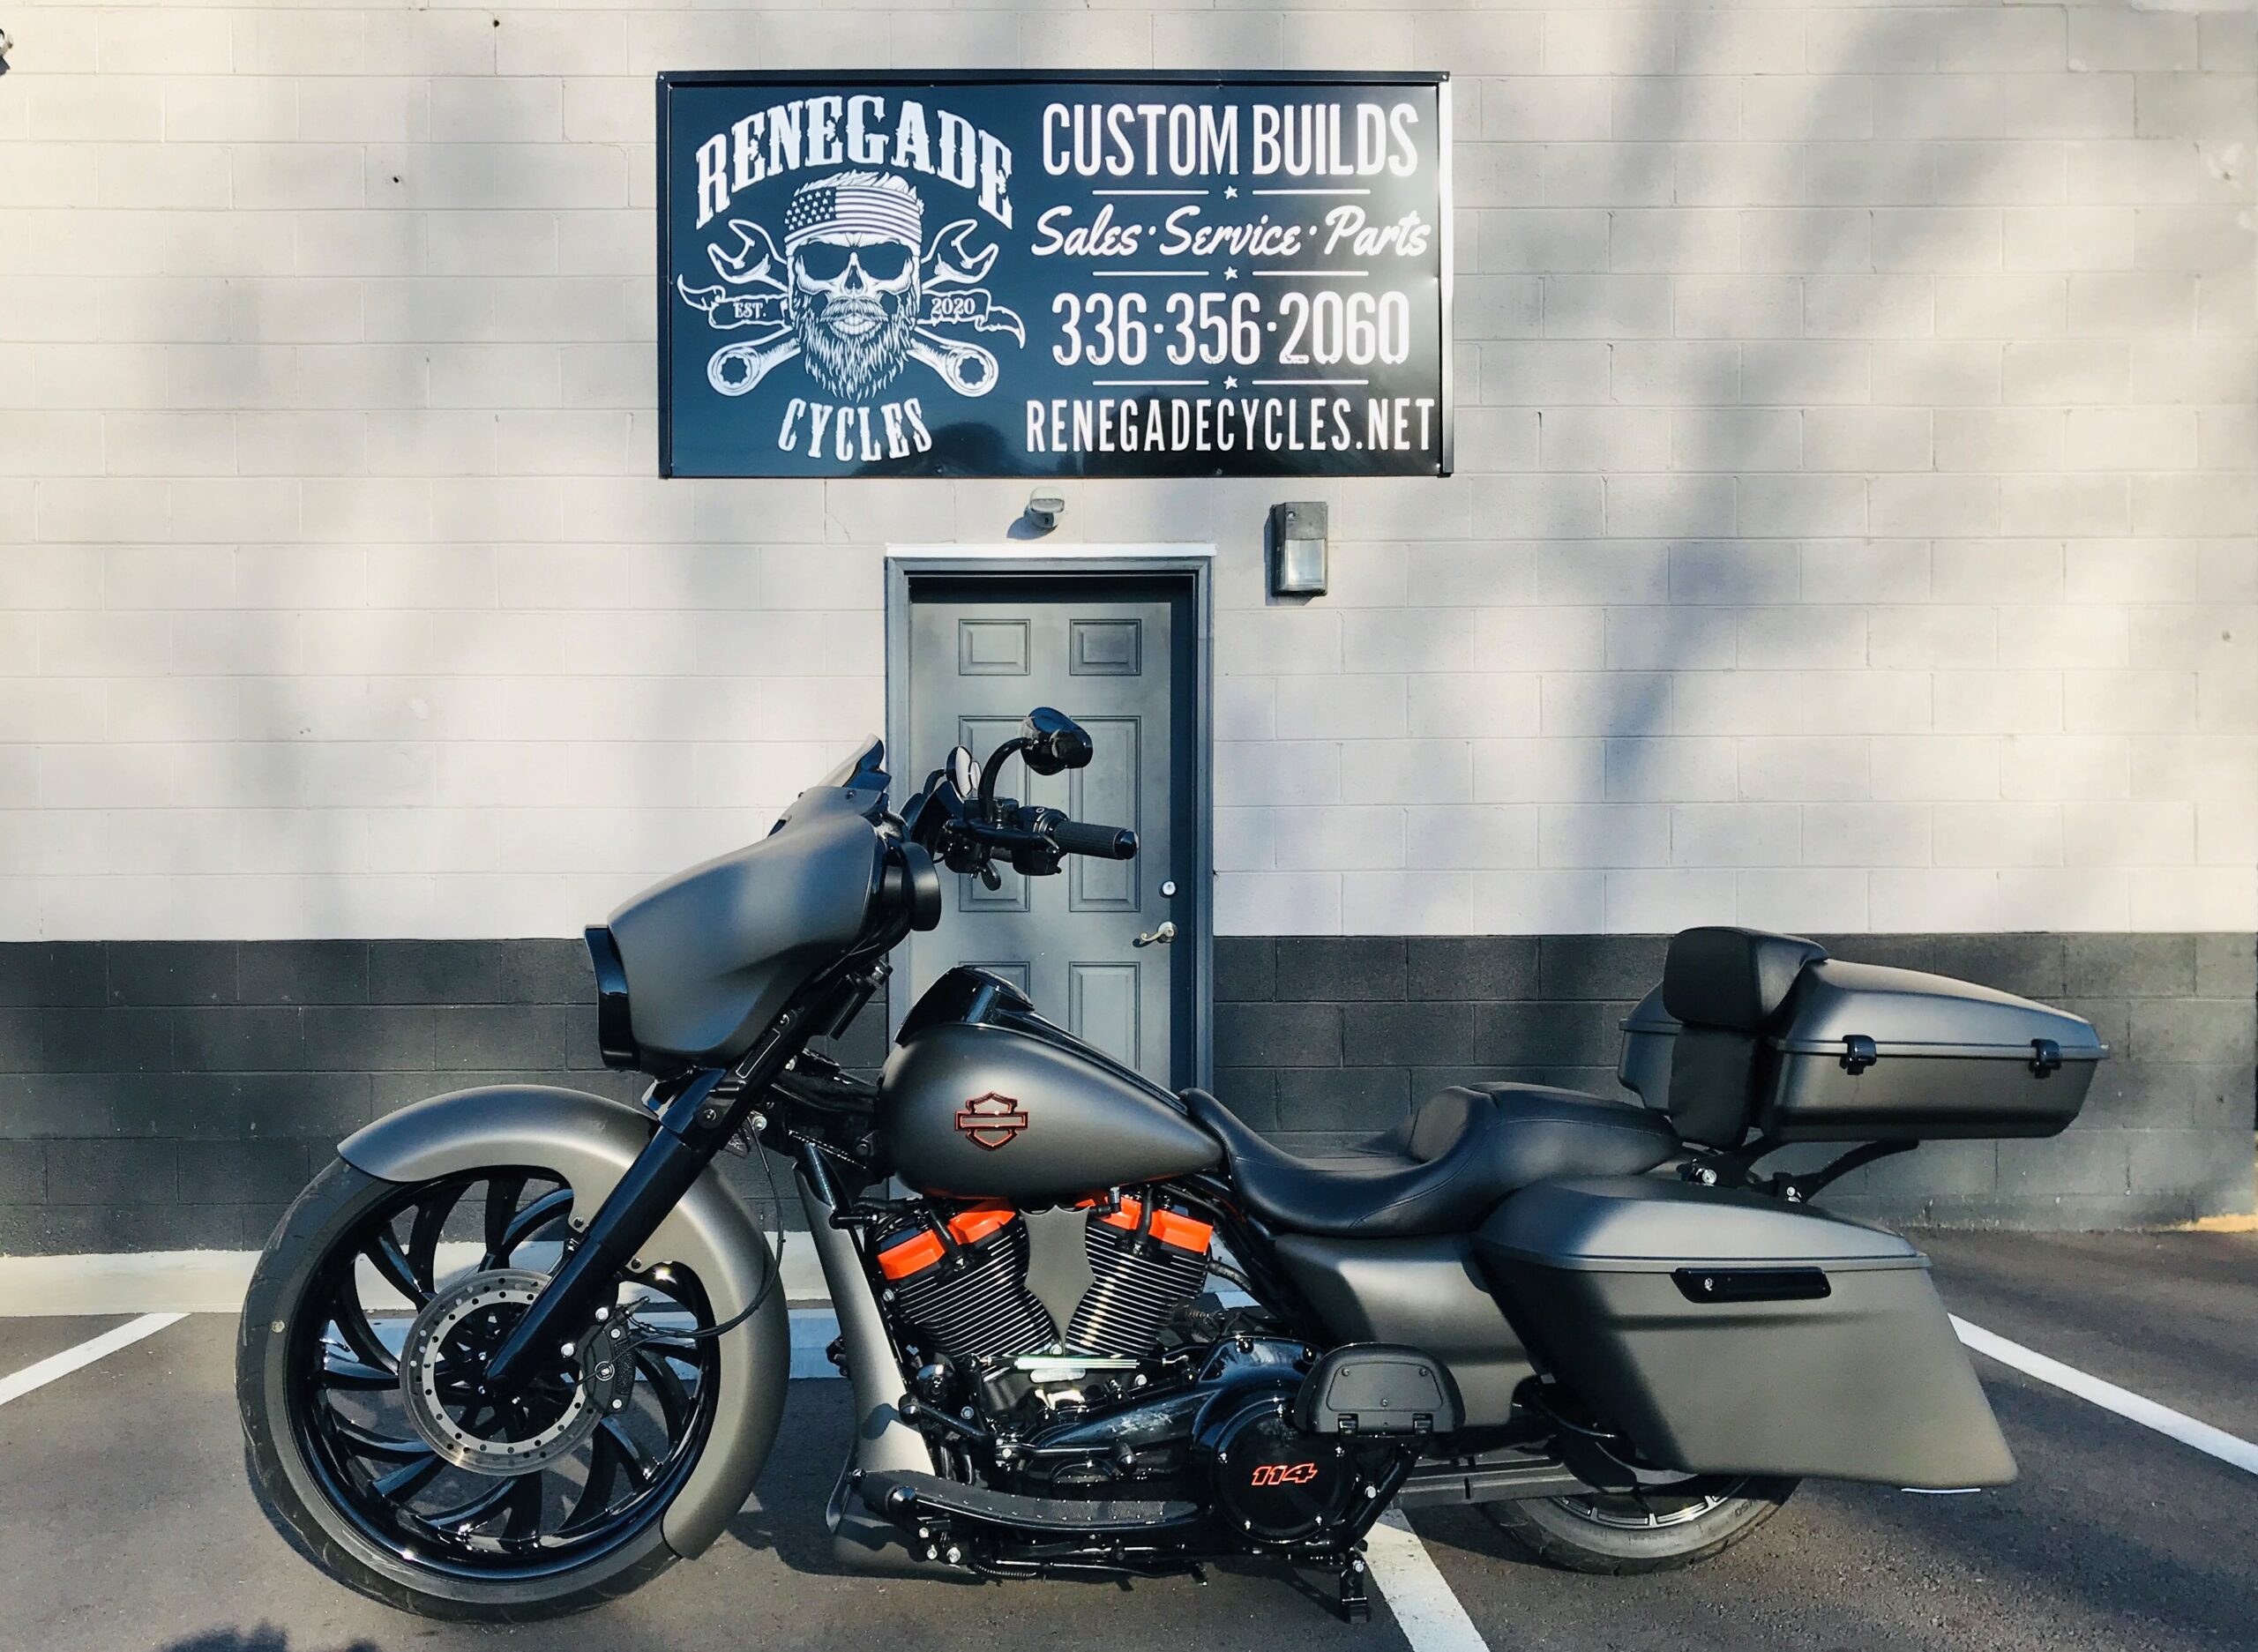 2017 Harley Davidson STREET GLIDE (a renegade Cycle's Own Custom Build!) ~  Renegade Cycles